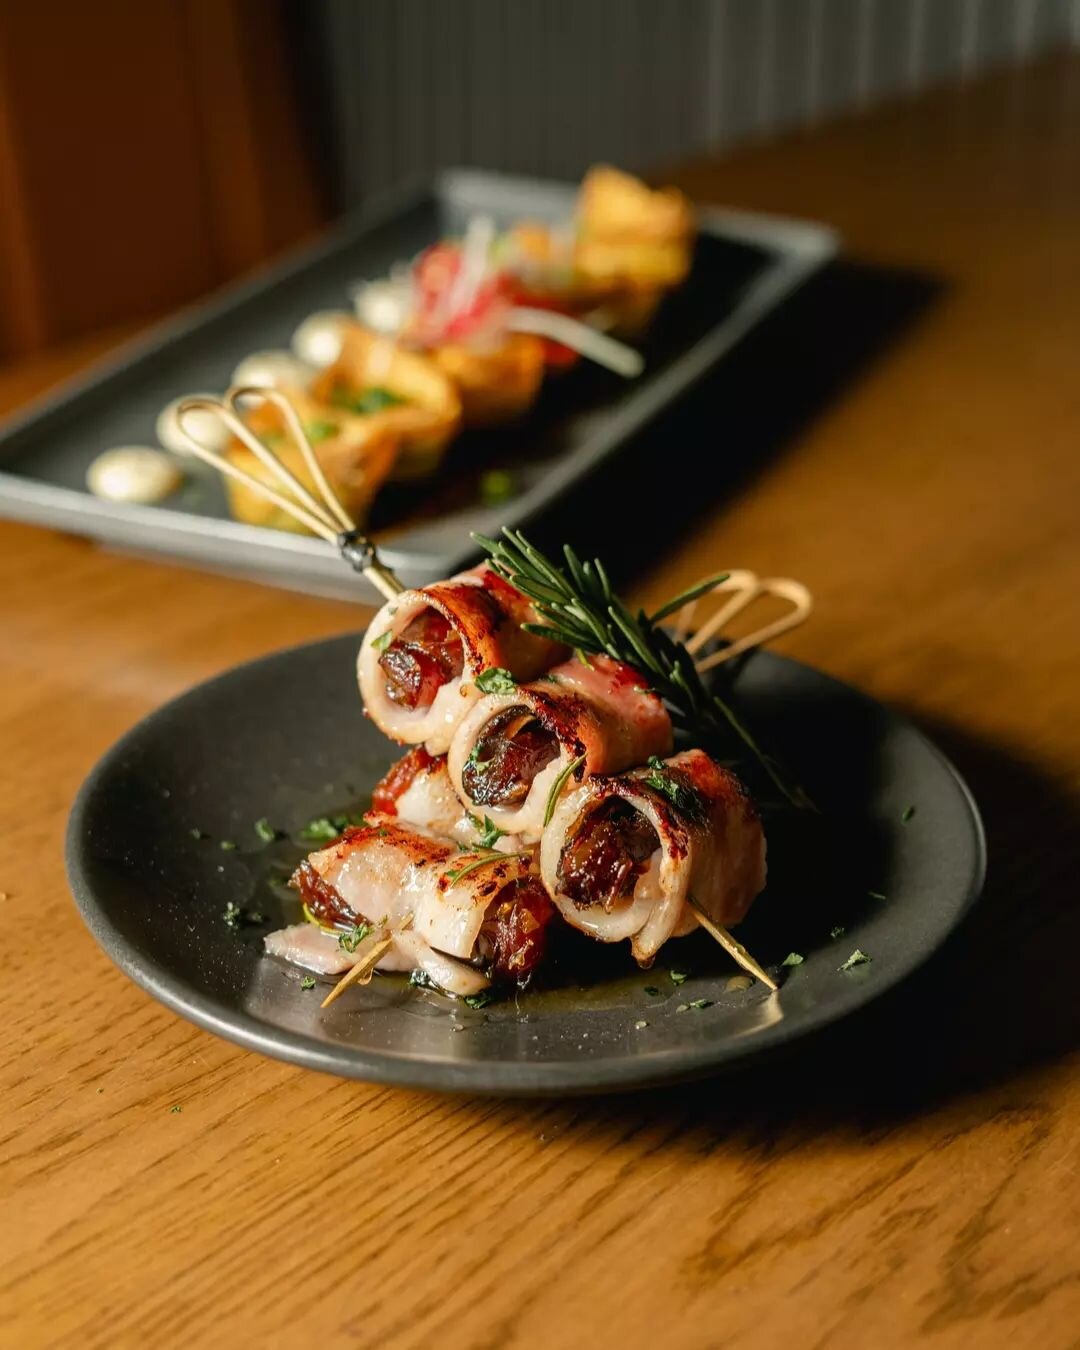 We can't get enough of our Crispy Bacon Wrapped Medjool Dates!&nbsp;

The perfect starter for your meal at the Subi&nbsp;🍽️

For table bookings follow the link in our bio.